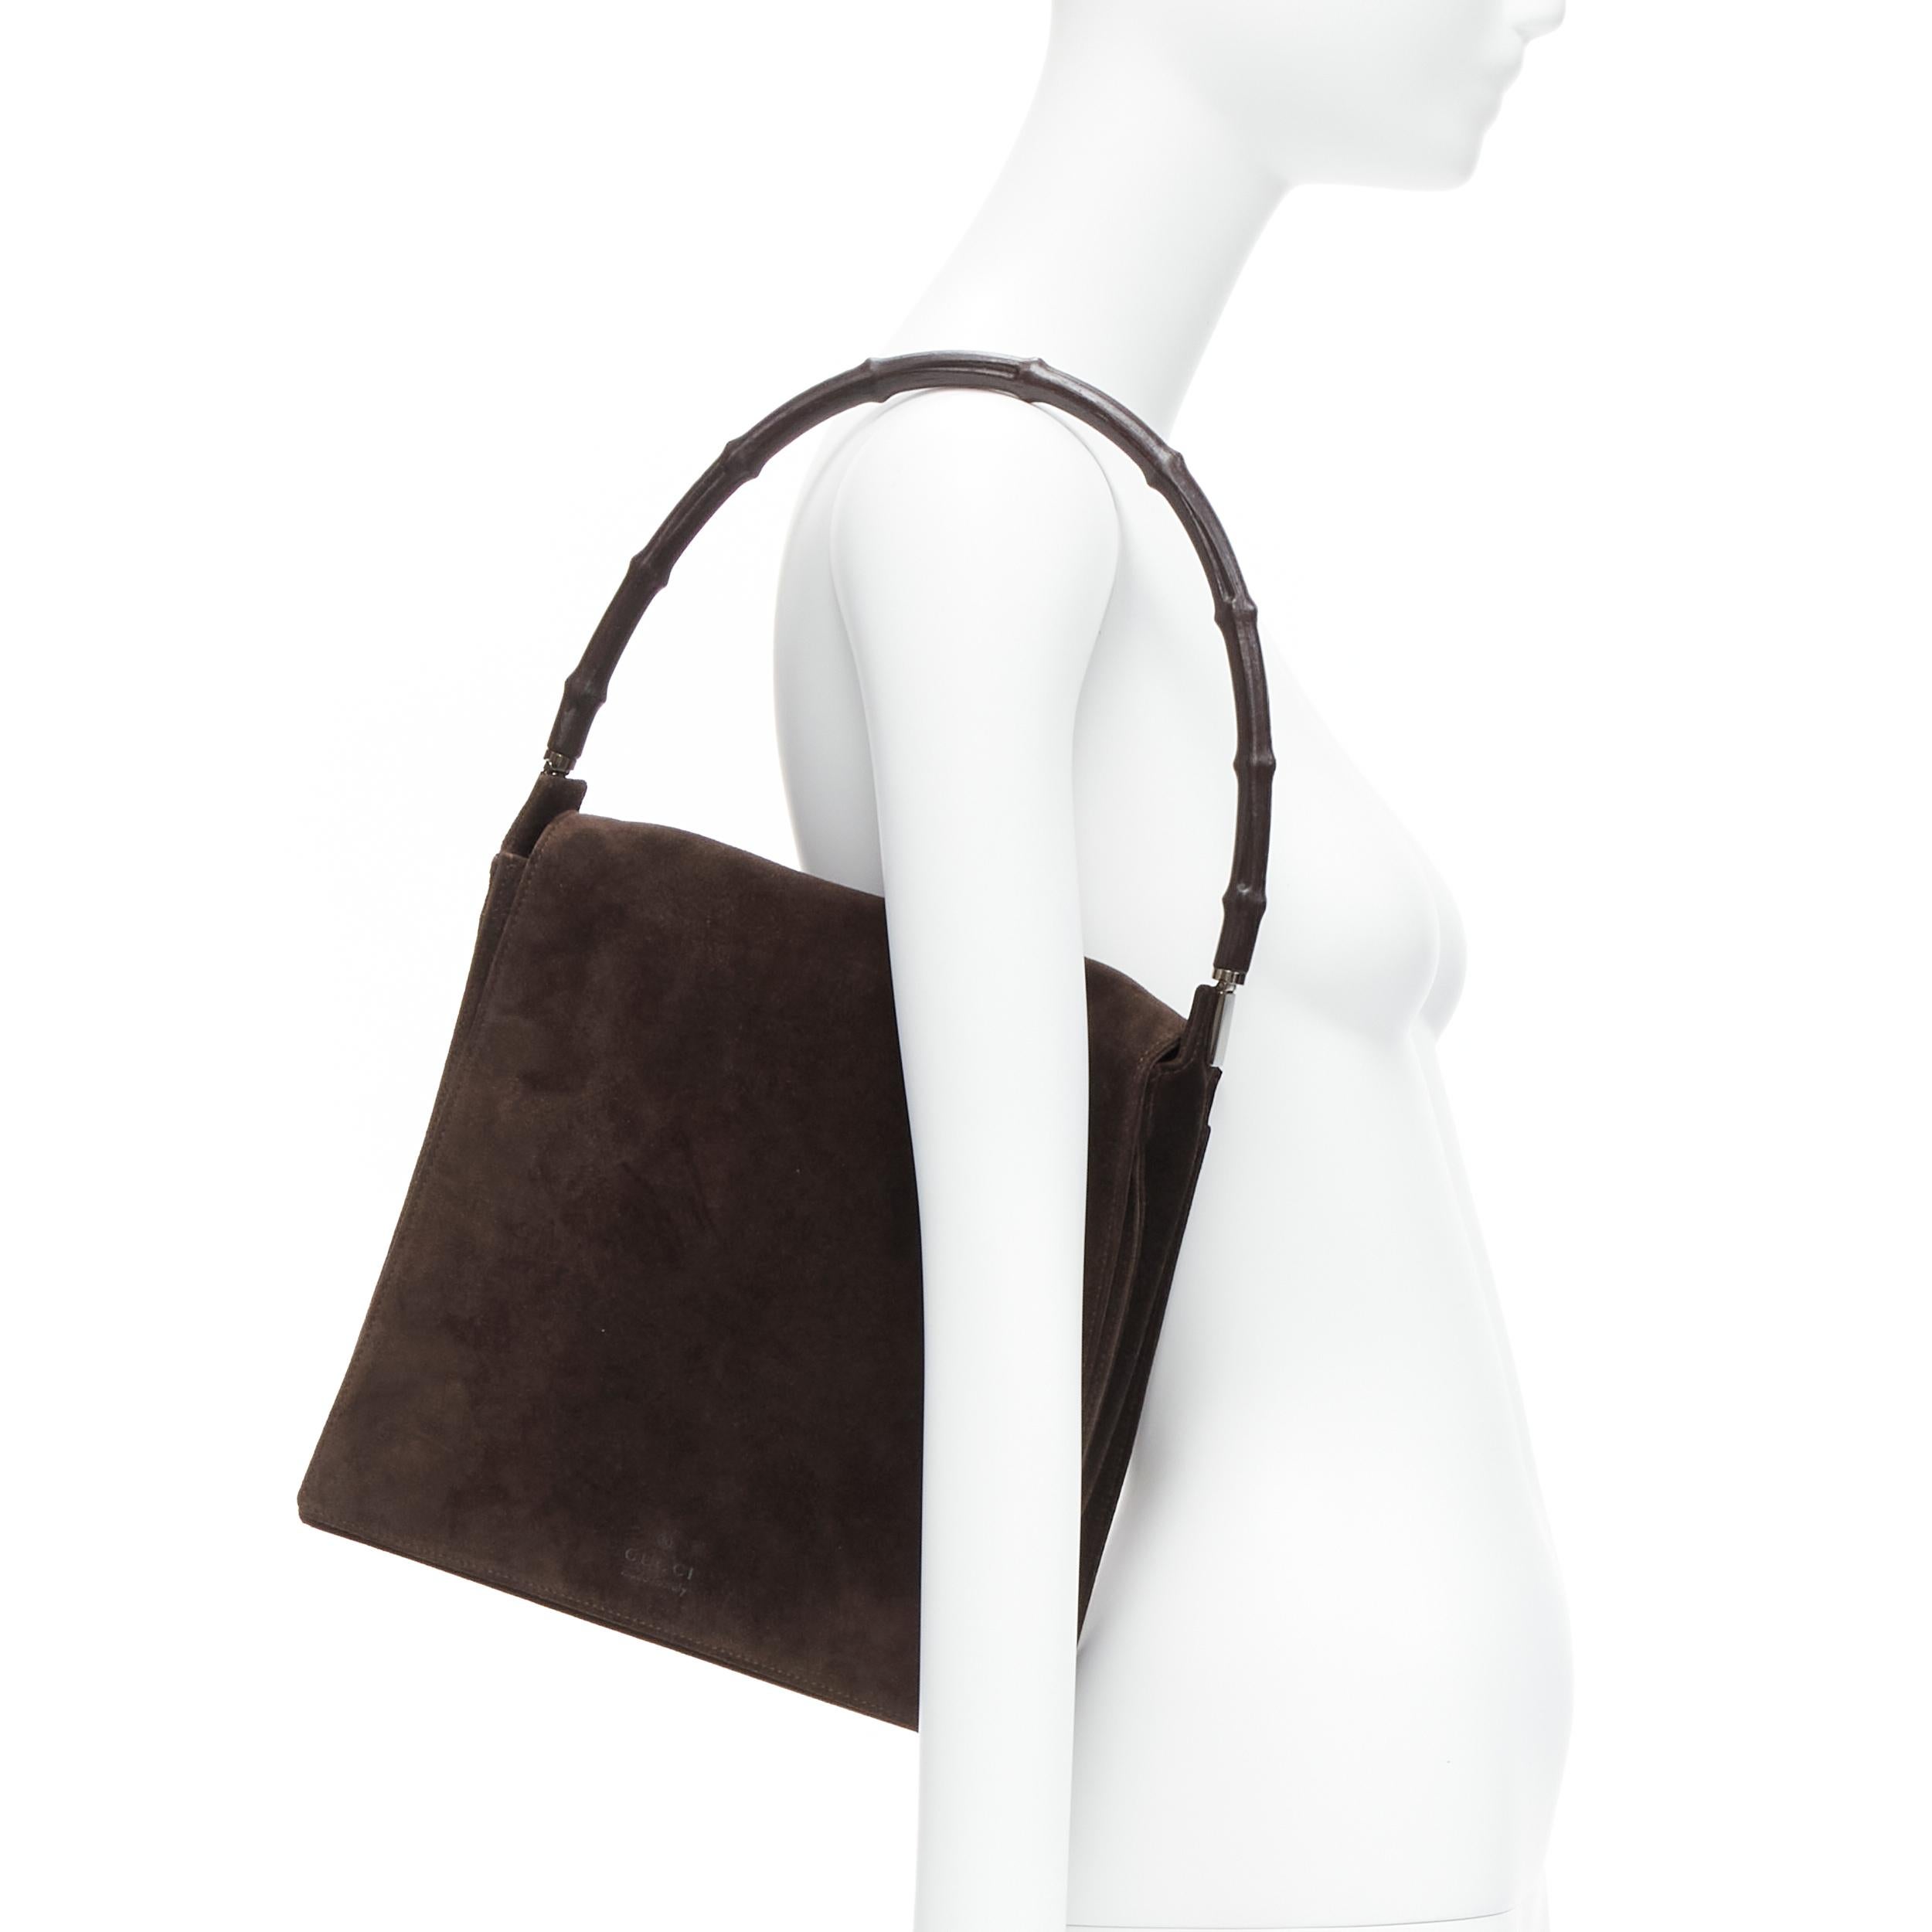 GUCCI Vintage brown bamboo handle suede leather flap shoulder bag
Reference: TGAS/D00240
Brand: Gucci
Collection: Bamboo
Material: Suede, Bamboo
Color: Brown
Pattern: Solid
Closure: Magnet
Lining: Brown Fabric
Extra Details: GUCCI logo on top of